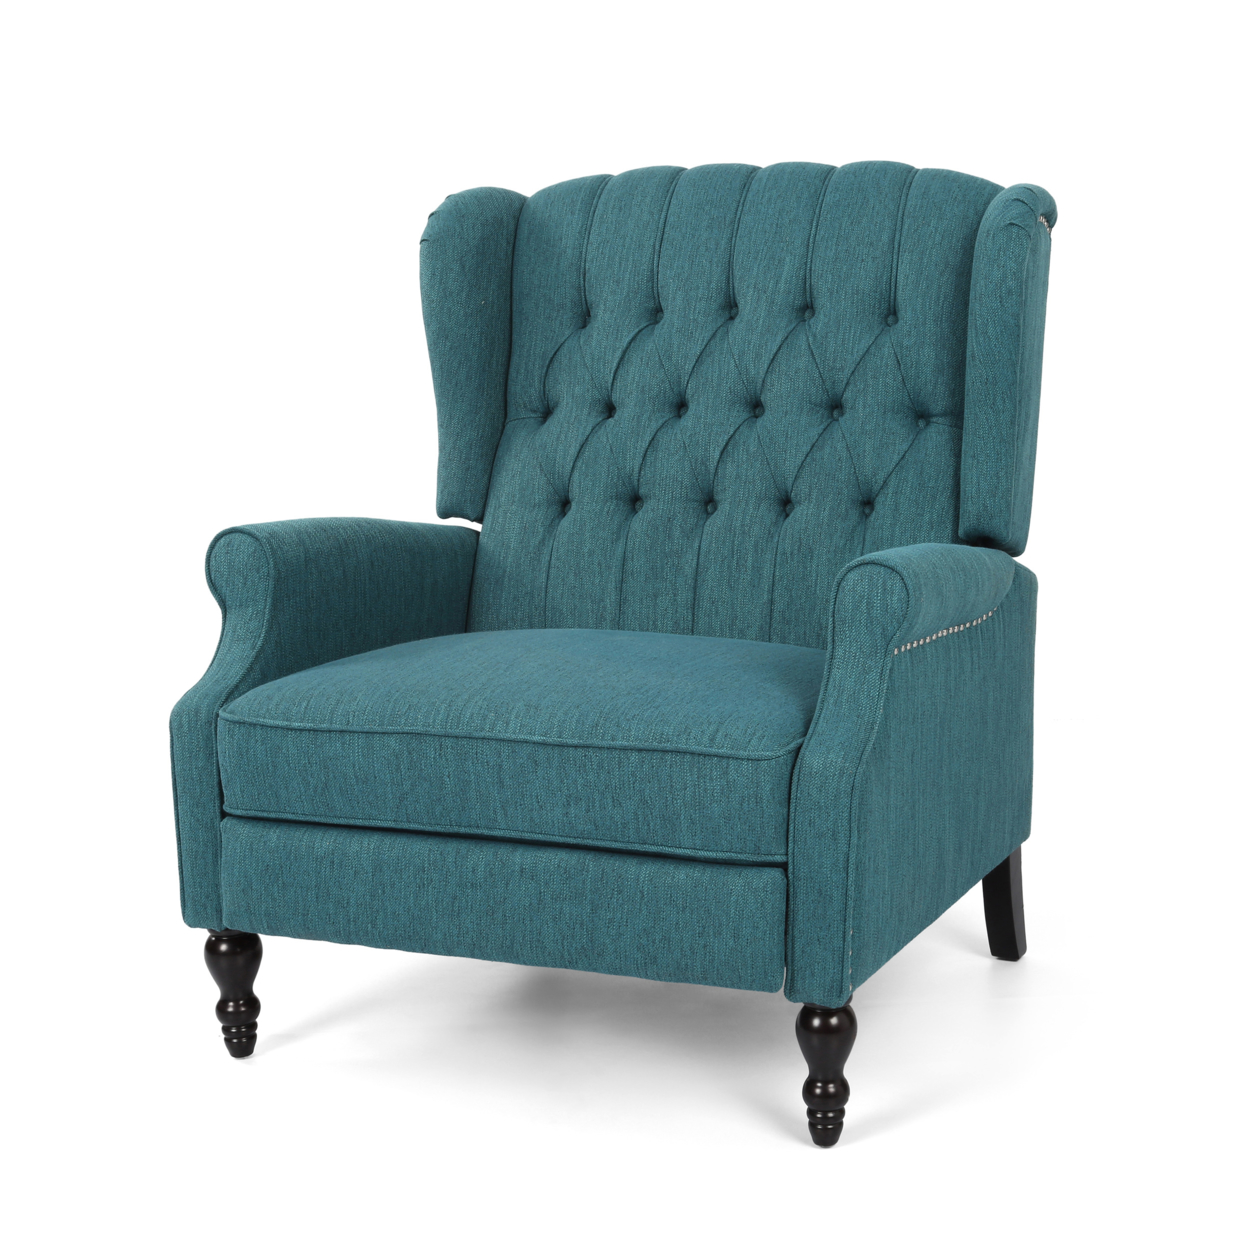 Salome Oversized Tufted Fabric Push Back Recliner - Teal + Dark Brown